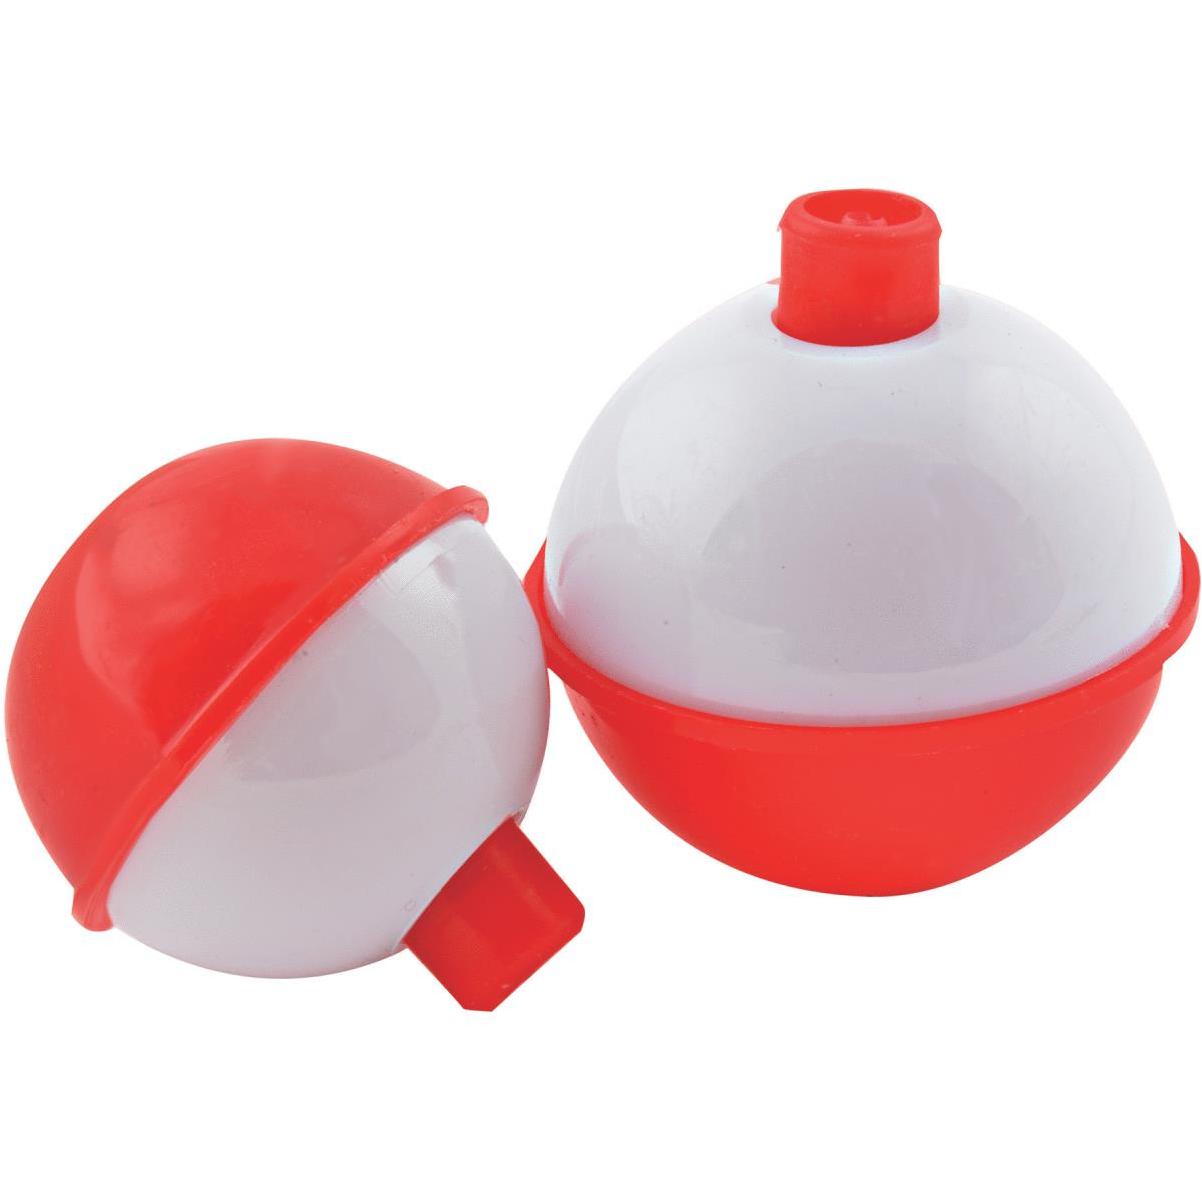 SouthBend 1-1/2 In. Red & White Push-Button Fishing Bobber Float (2-Pack)